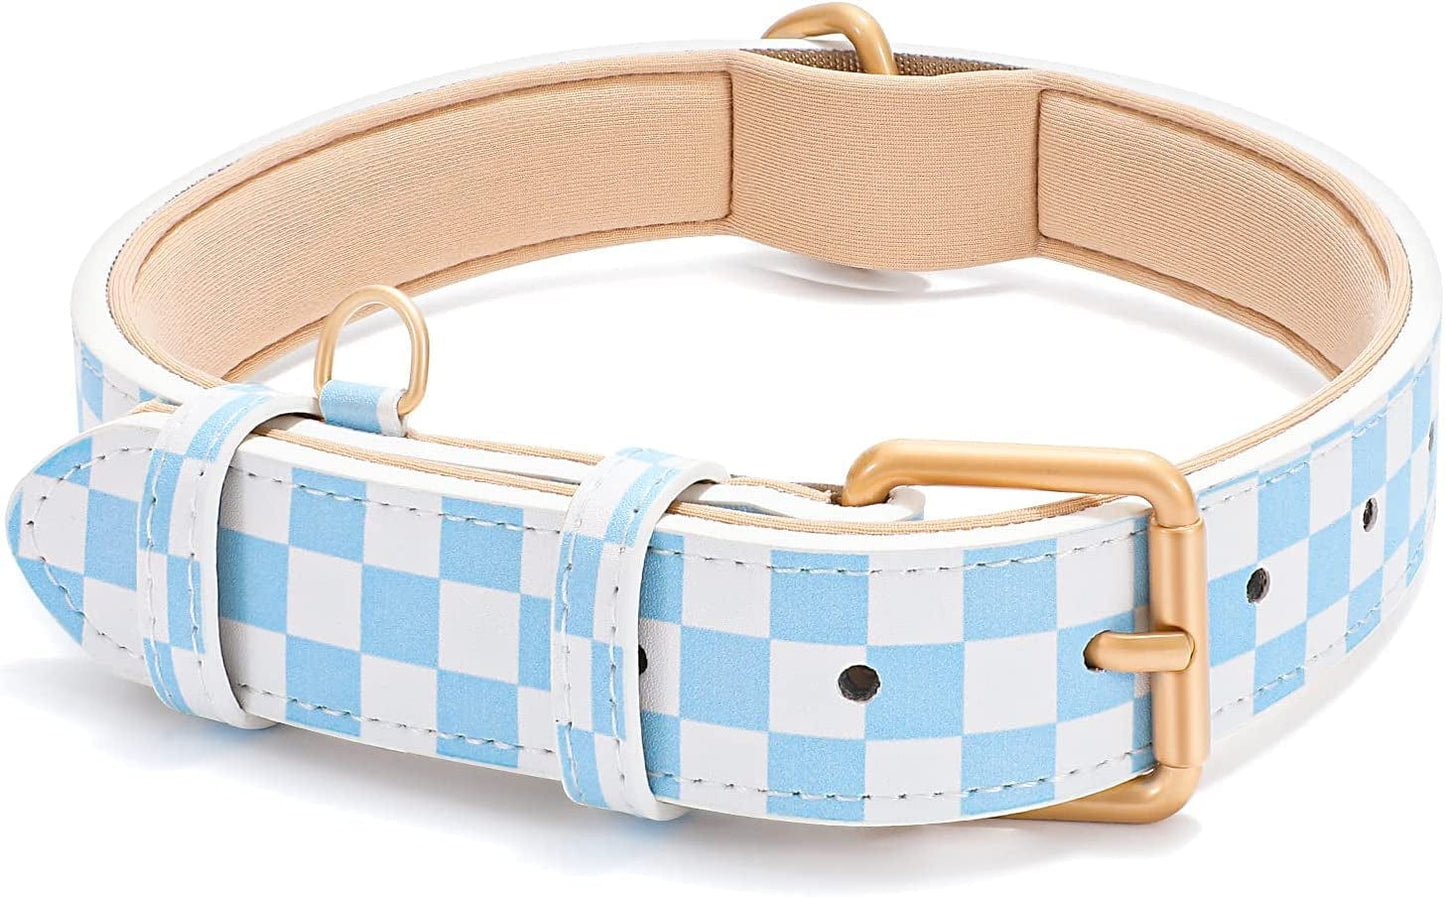 WHIPPY Airtag Leather Dog Collar GPS Tracker Air Tag Puppy Collar Adjustable Soft Leather Padded Dog Collar with Airtag Holder Case for Small Medium Large Dog Pet Backpack,Pink,M Electronics > GPS Accessories > GPS Cases WHIPPY H-blue/white square L:Neck 20"-23",Width1.18" 